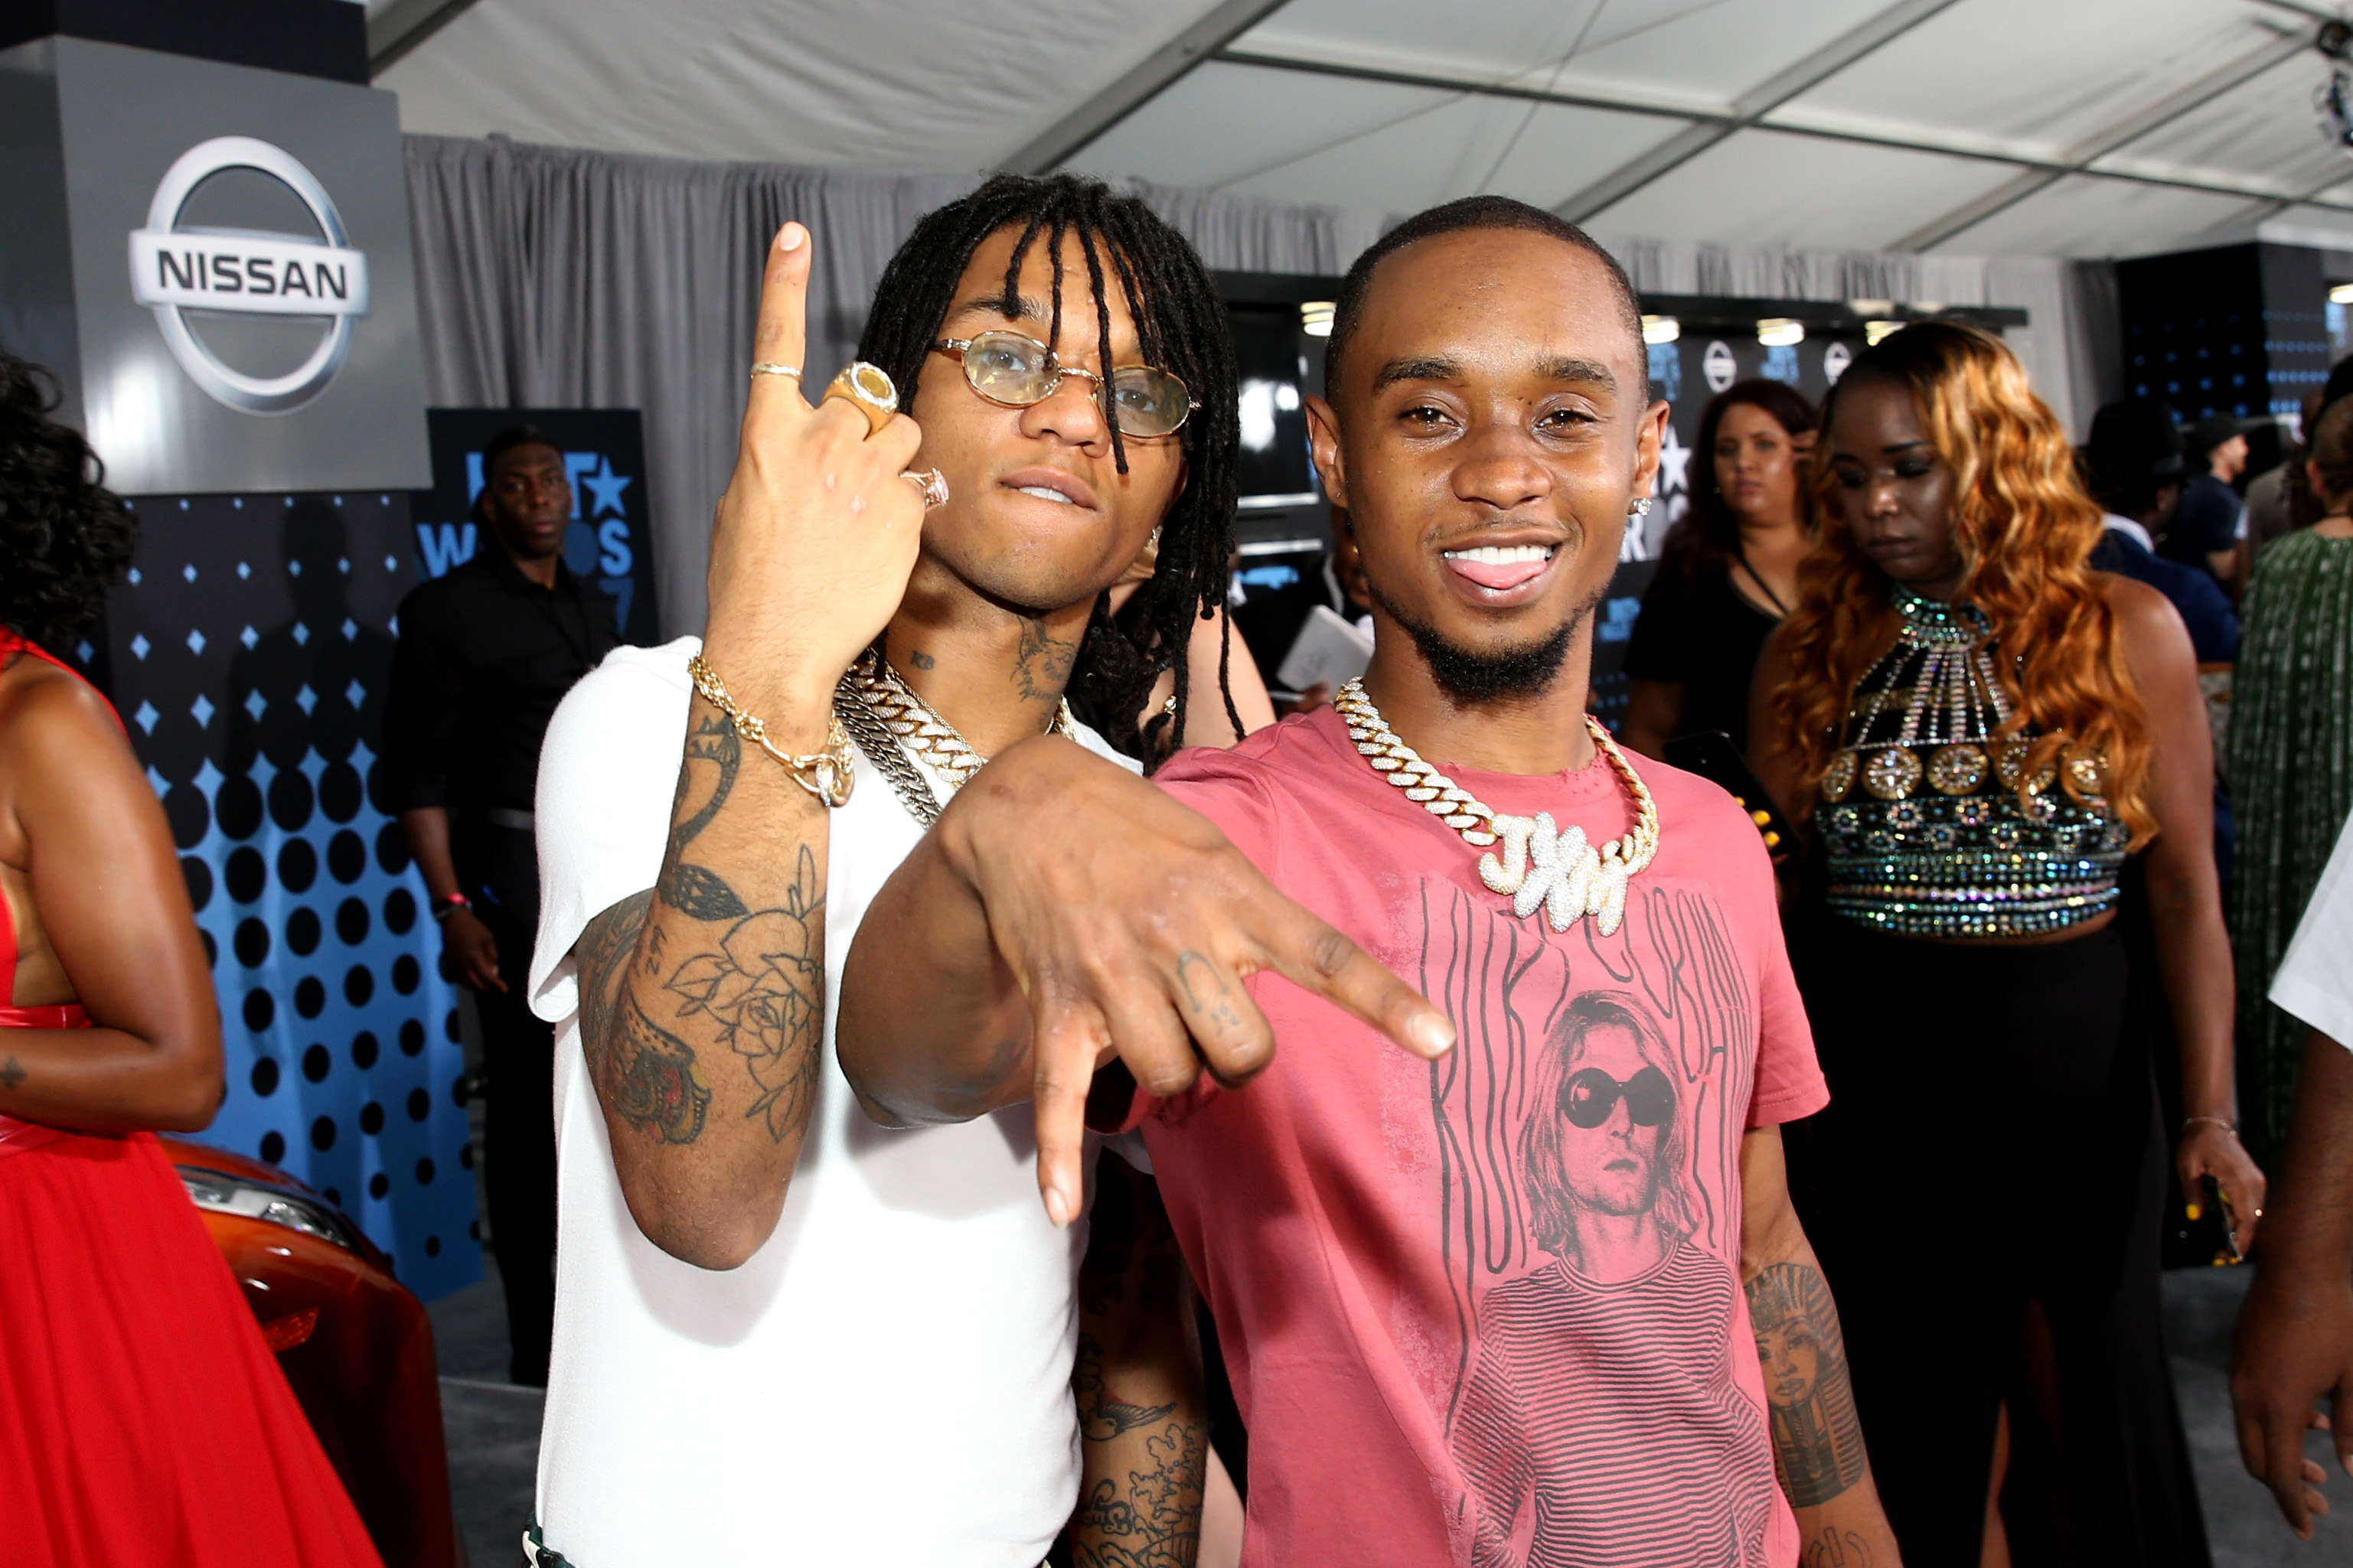 Listen to Pharrell Williams team up with Rae Sremmurd on new song 'Chanel